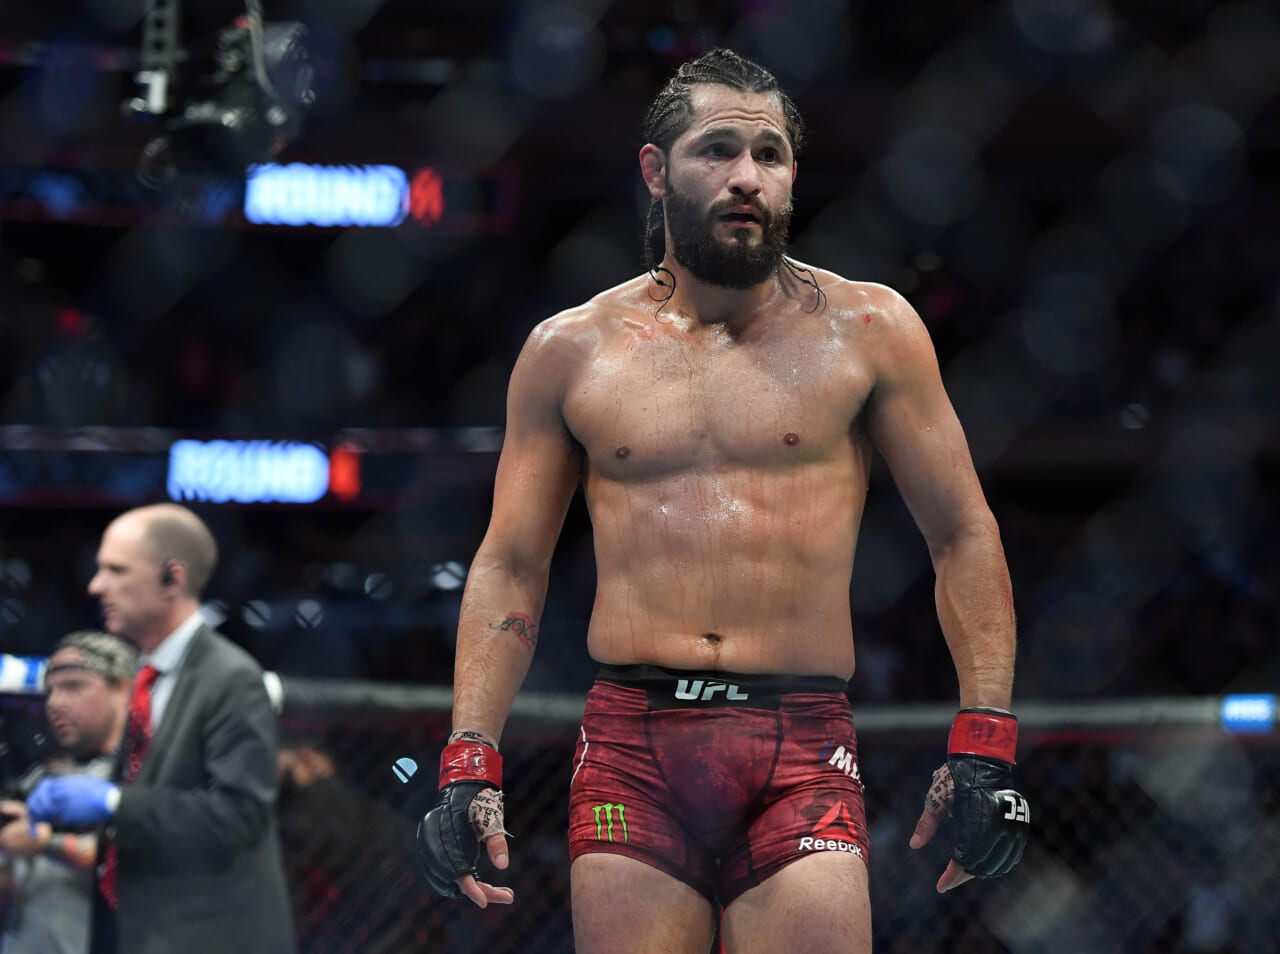 UFC: Momentum building towards Usman – Masvidal rematch and coaching The Ultimate Fighter